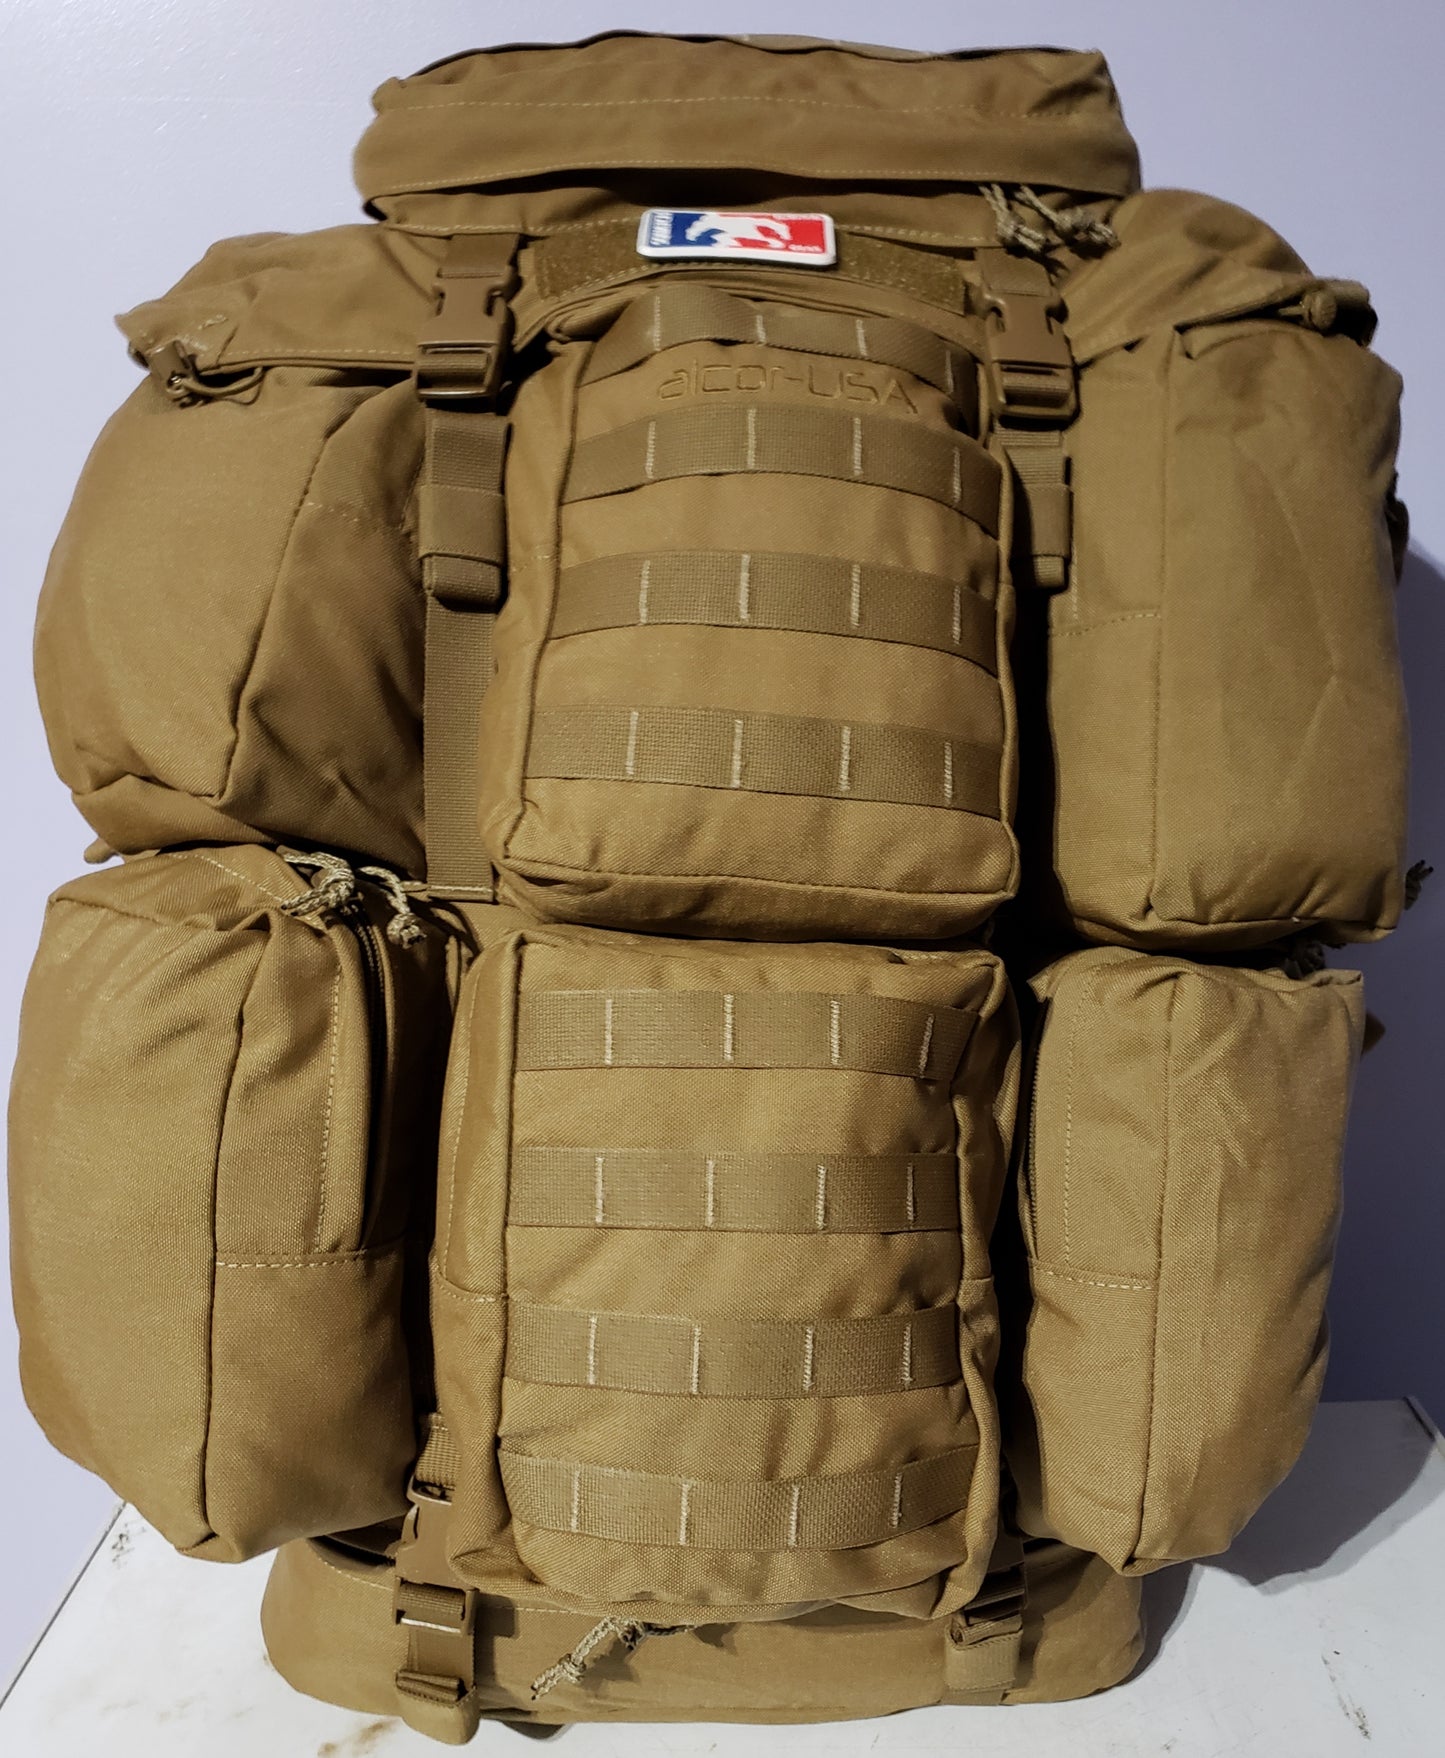 sasquatch - bigfoot -BACK PACK - ruck sack - backpack - rucksack - ruck - military style - tactical pack - black tactical - usa made gear - us - civilian pack - overland - outdoor - contingency - resiliency - self reliance - camping - hunting - off grid - survial pack - emergency pack - travel pack - internal frame  - biden - yolo - fomo